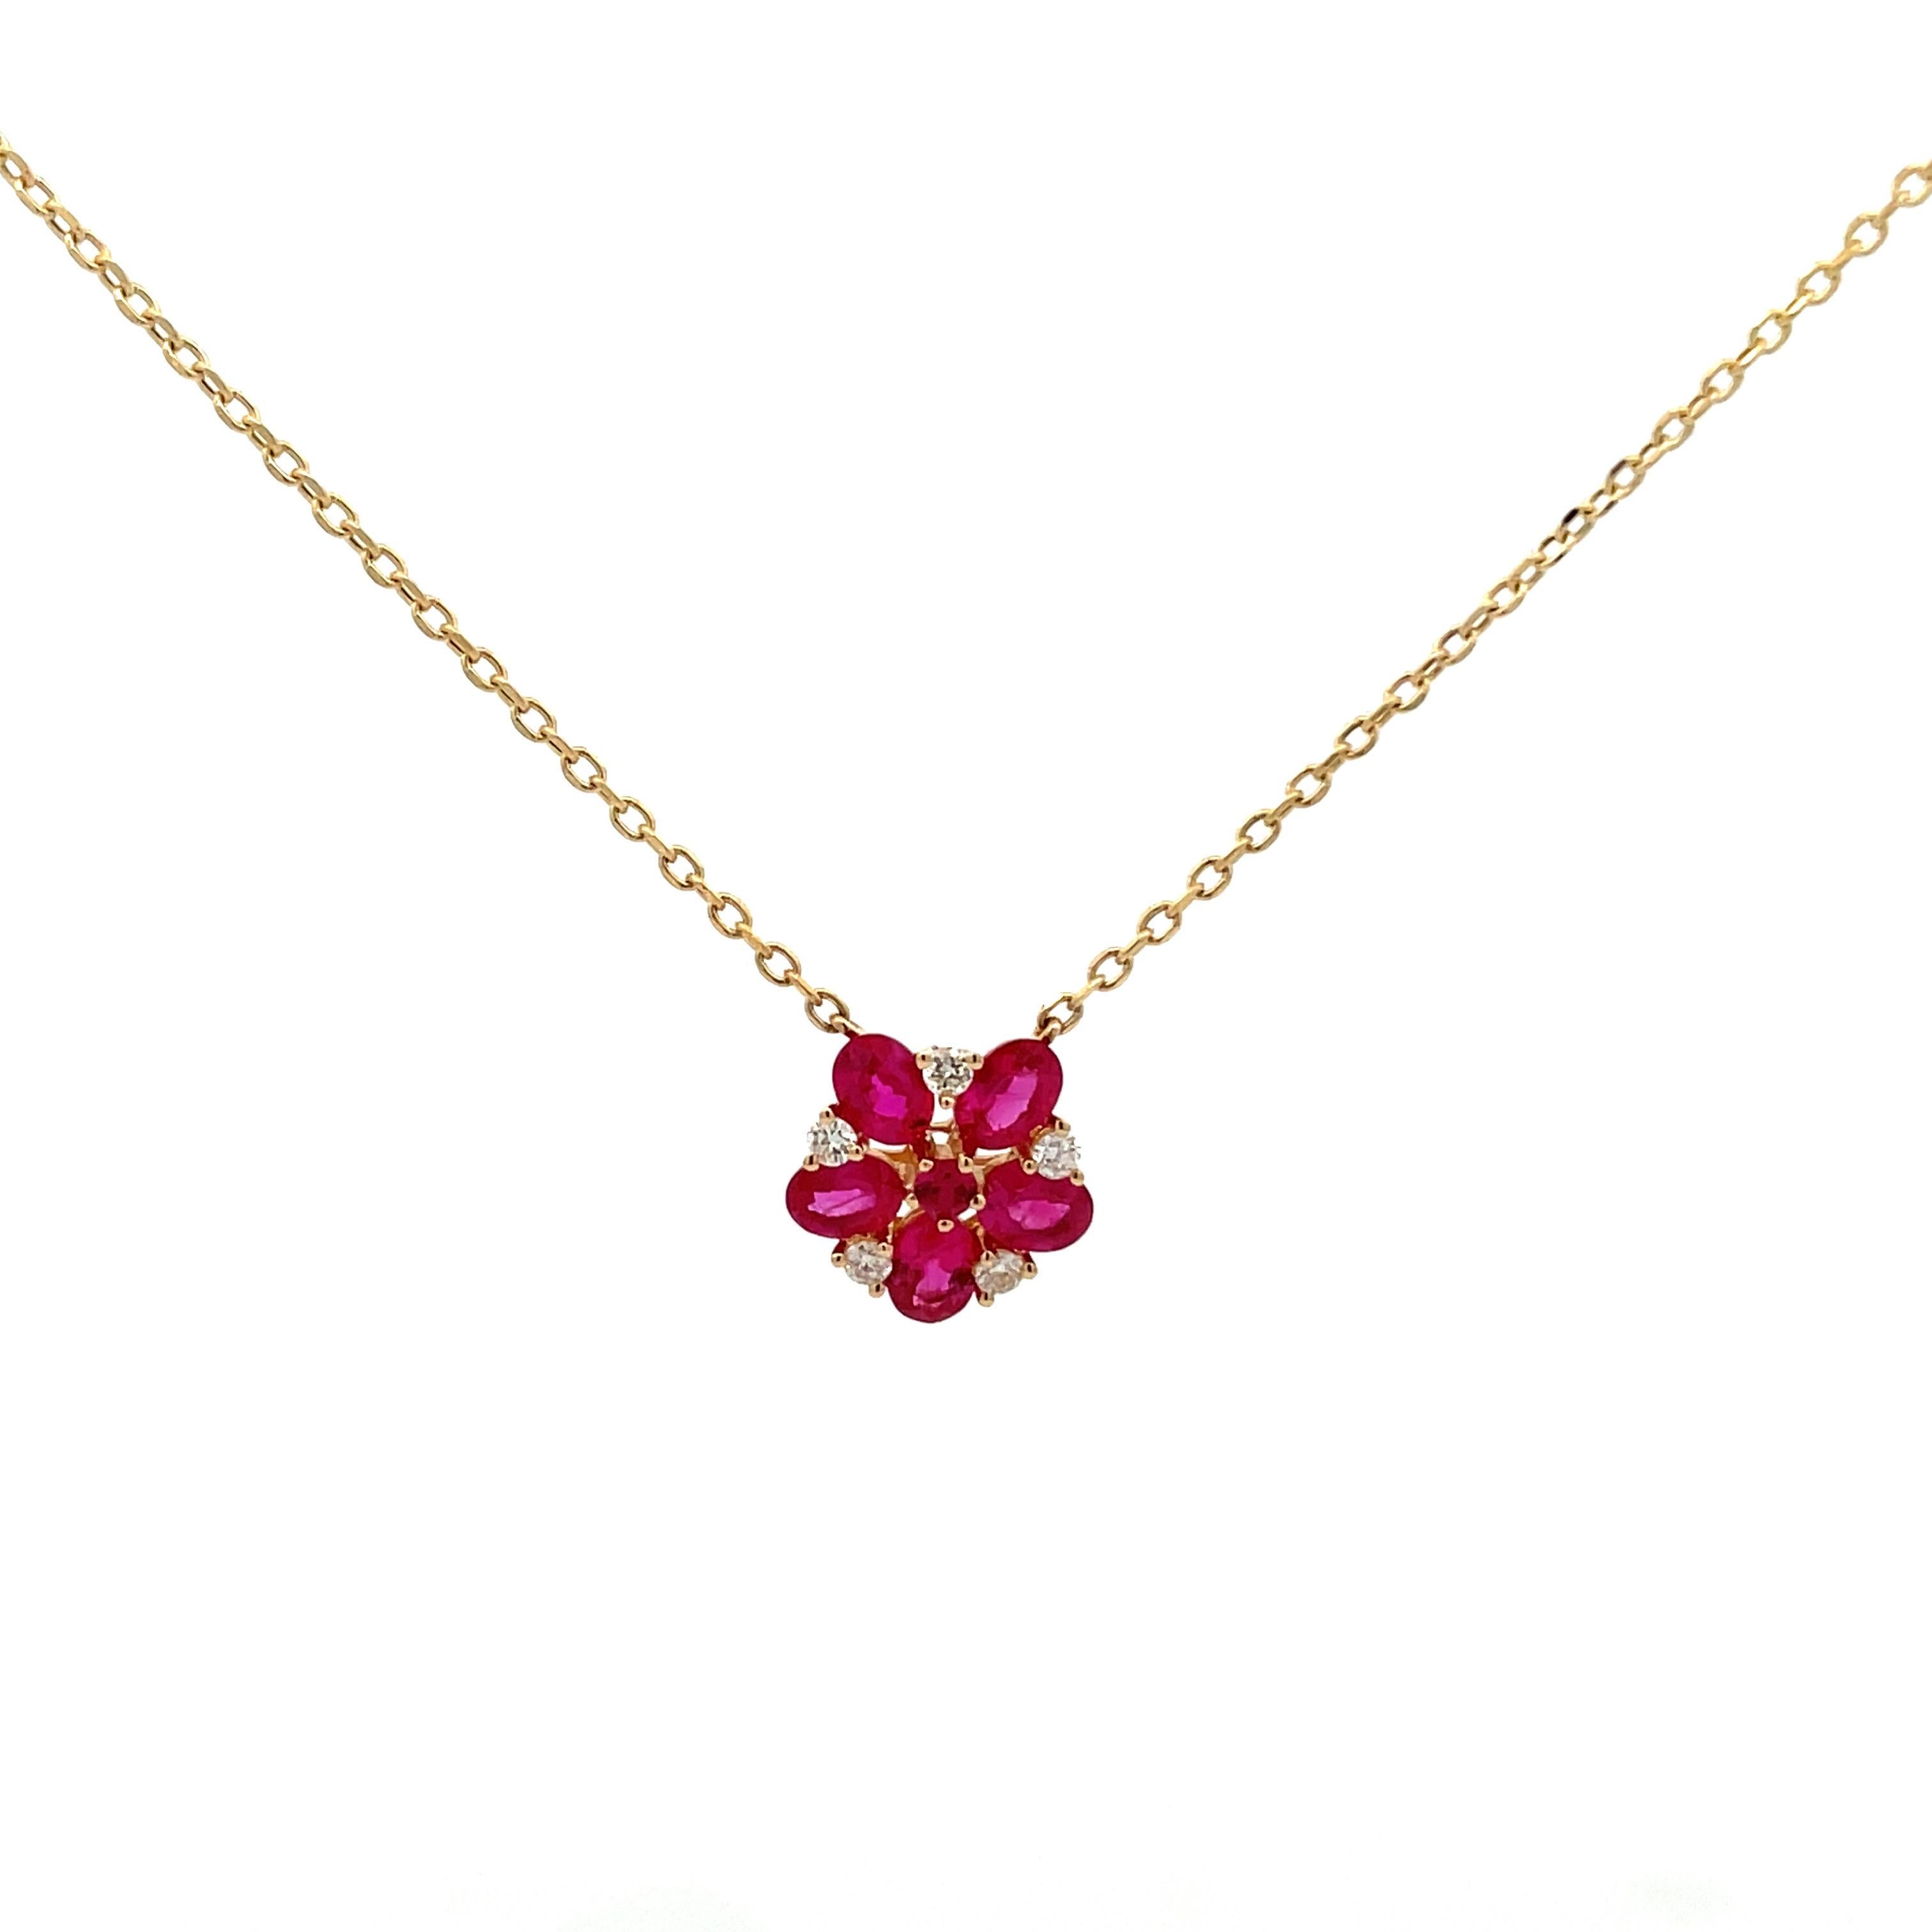 Contemporary Ruby Diamond Floral Cluster Pendant Necklace 1.12 CTTW 14 Karat Yellow Gold 